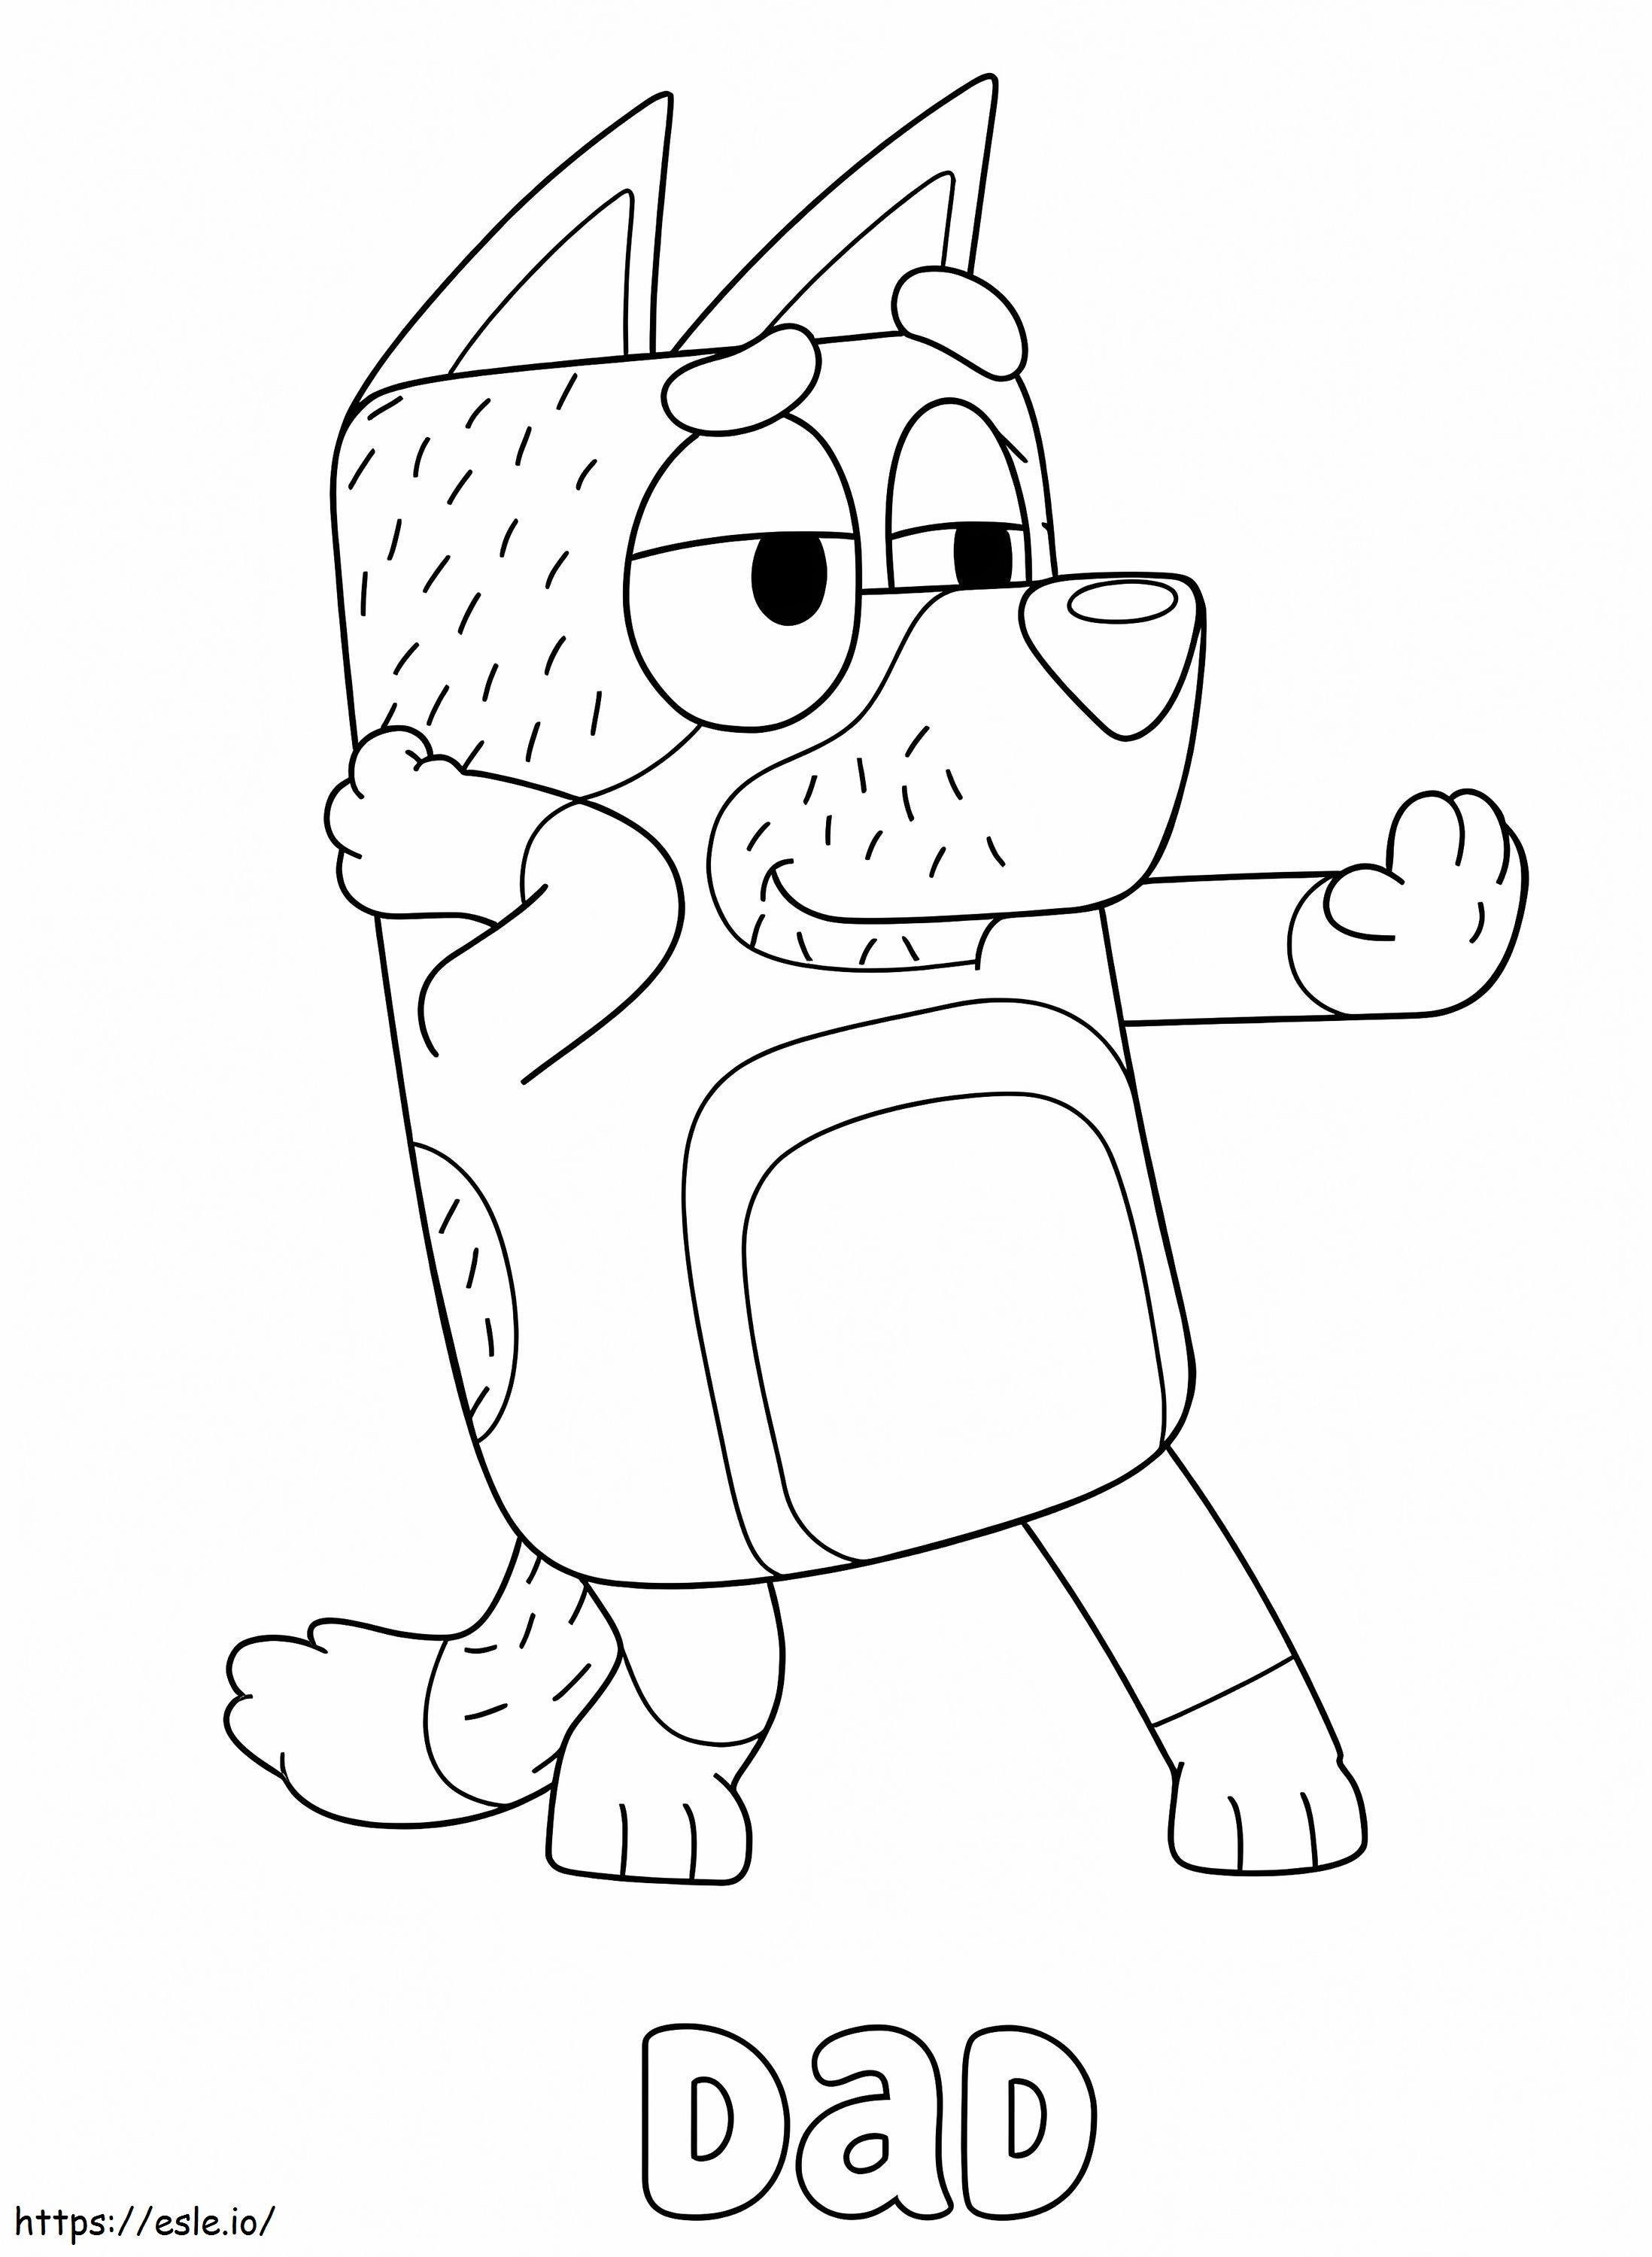 Dad From Bluey coloring page